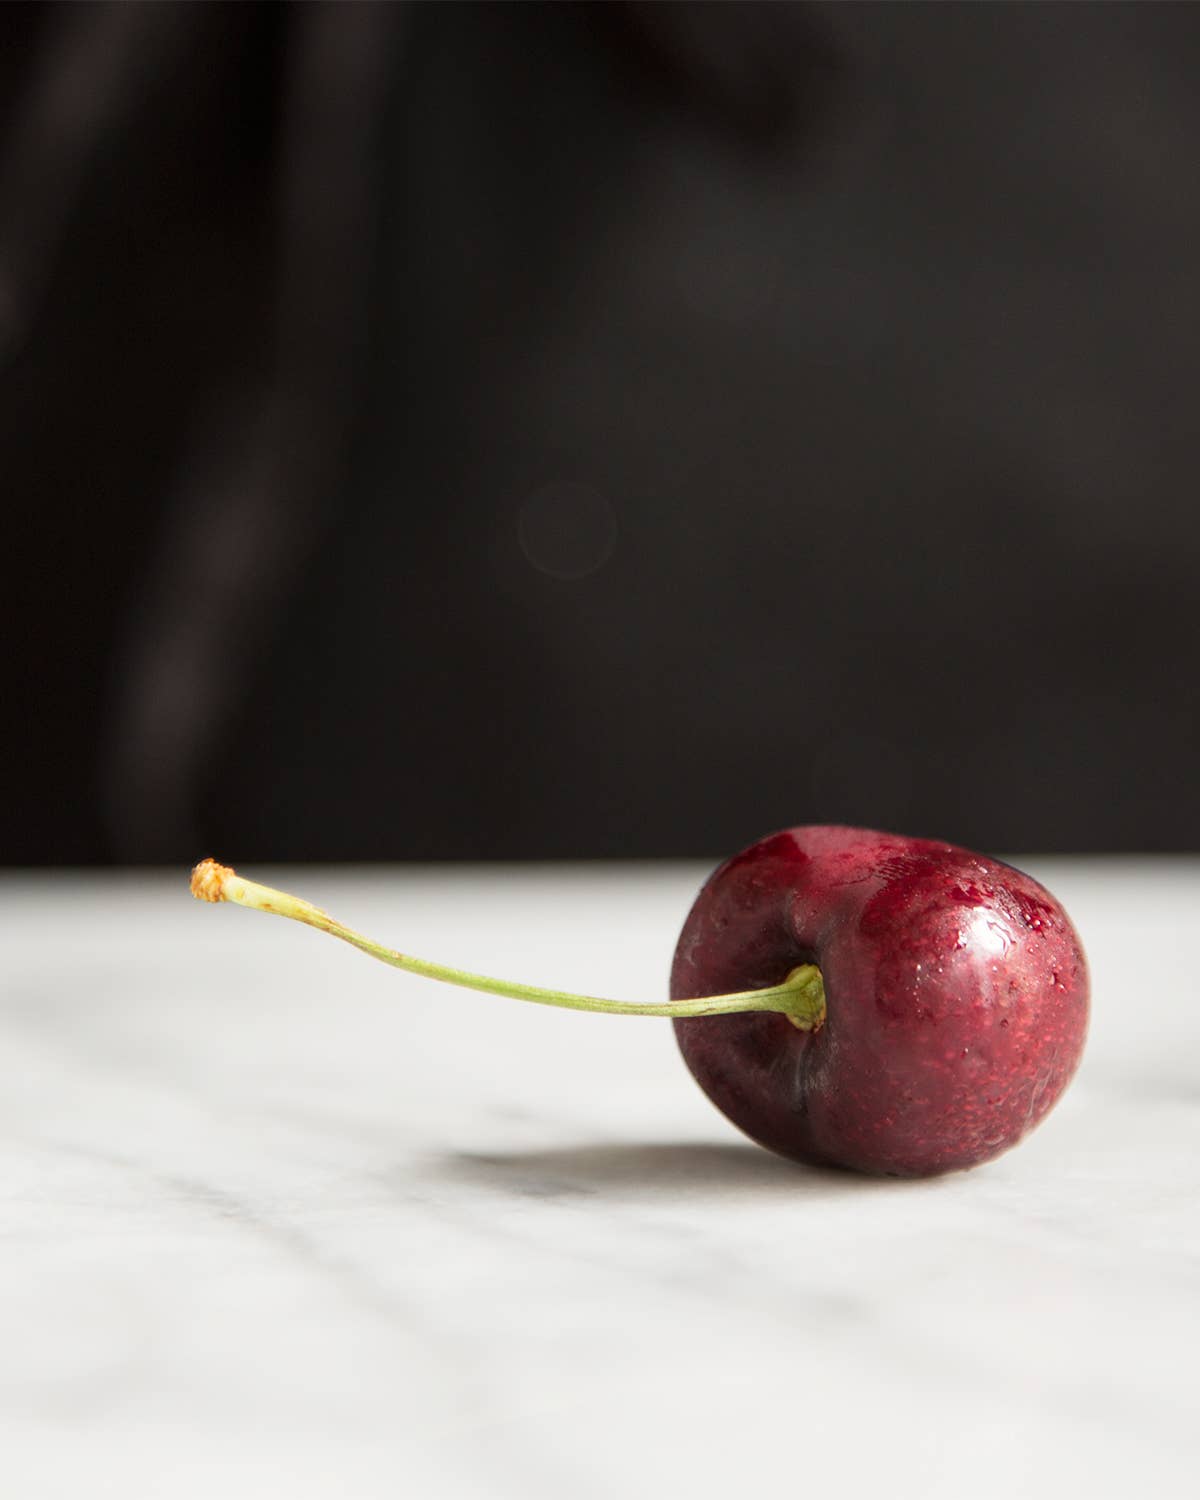 How to Pit Cherries